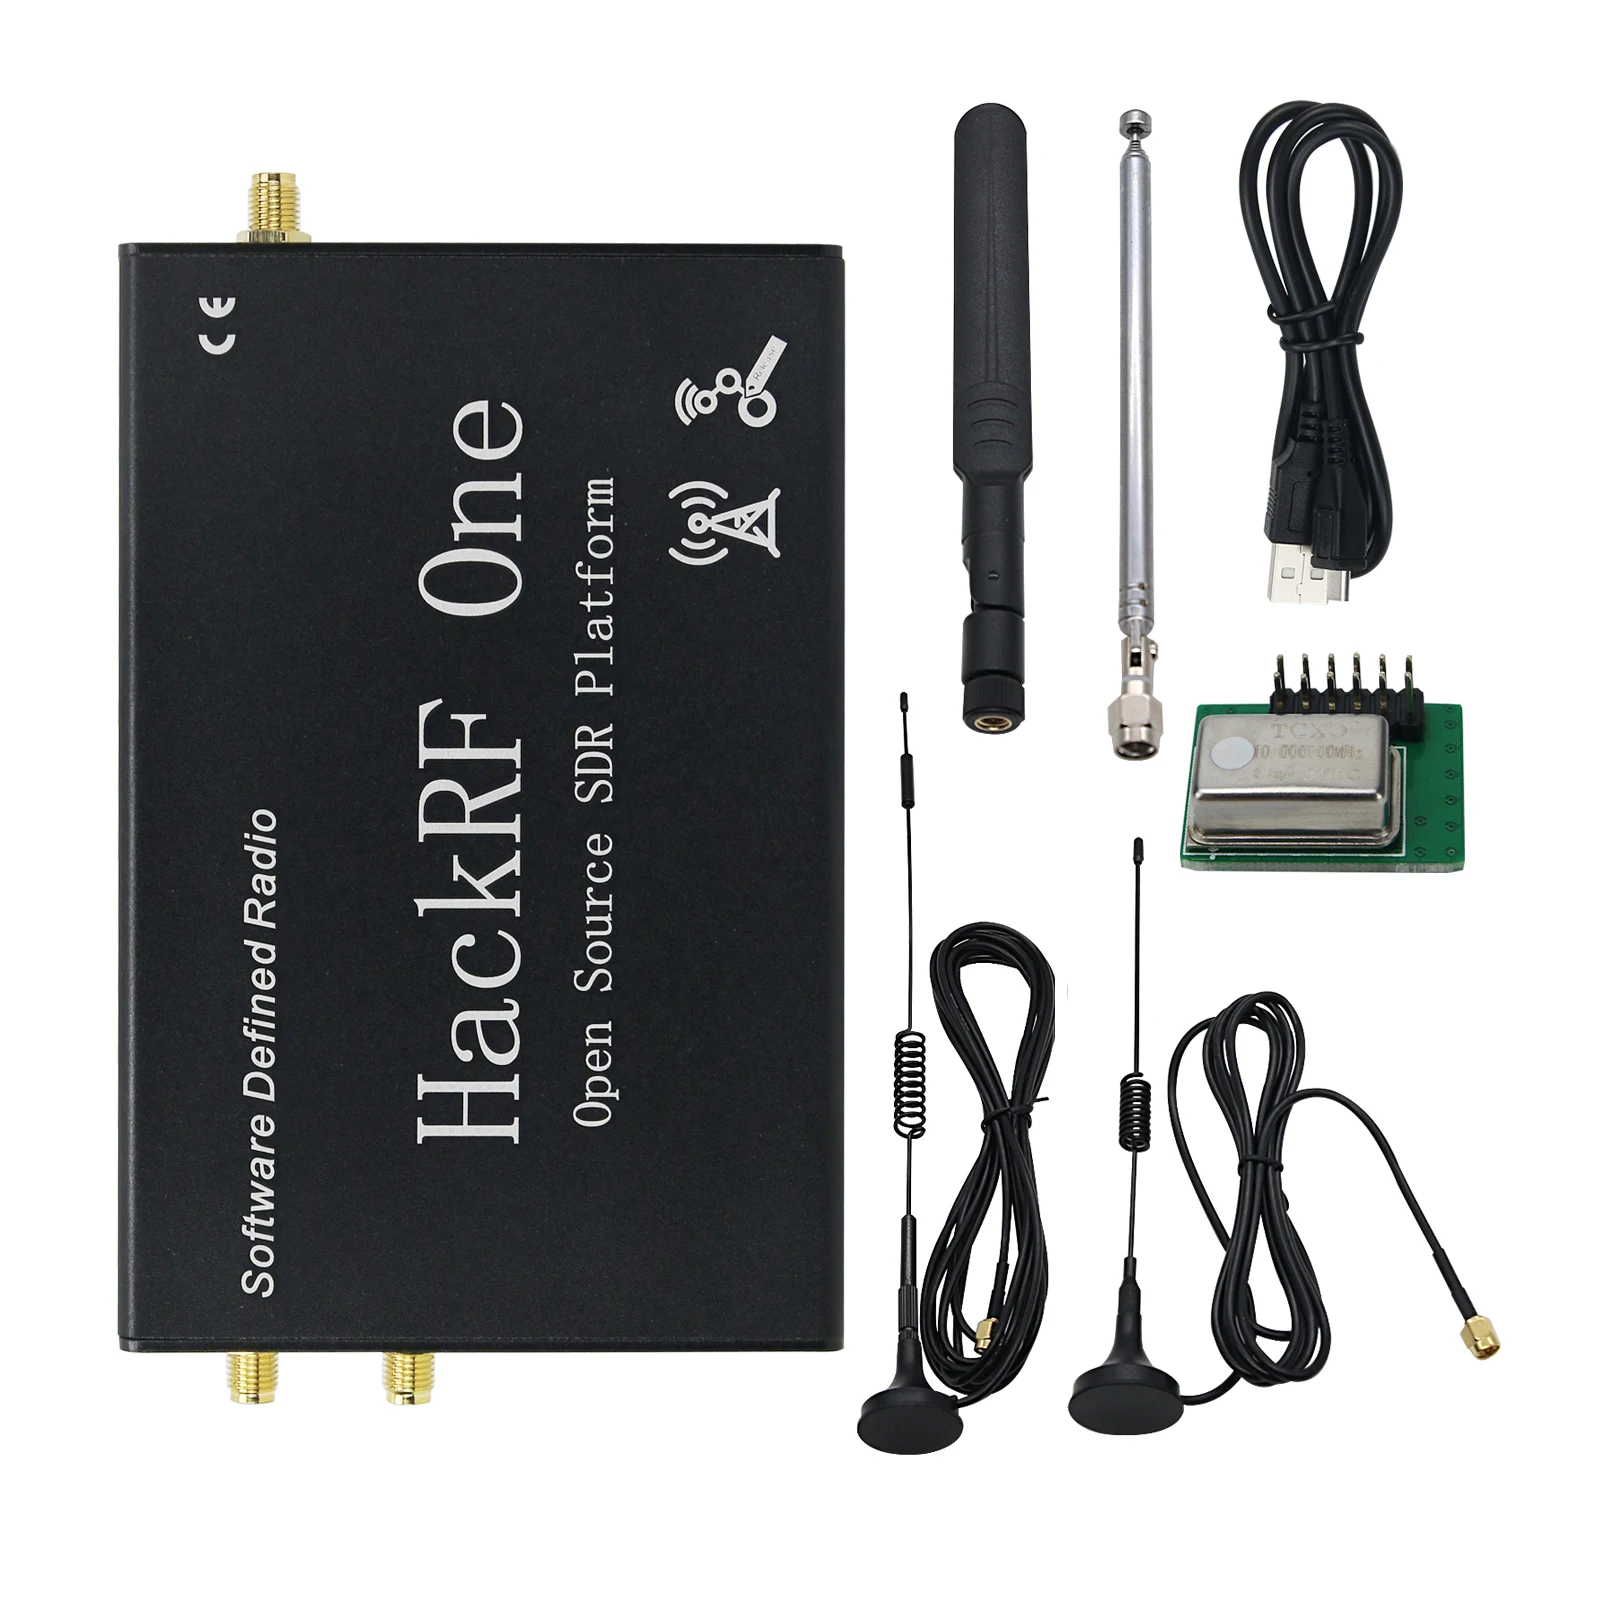 HackRF One R9 V1.8.x + Upgraded PortaPack H2 + Shell + 5 Antennas + USB  Cable